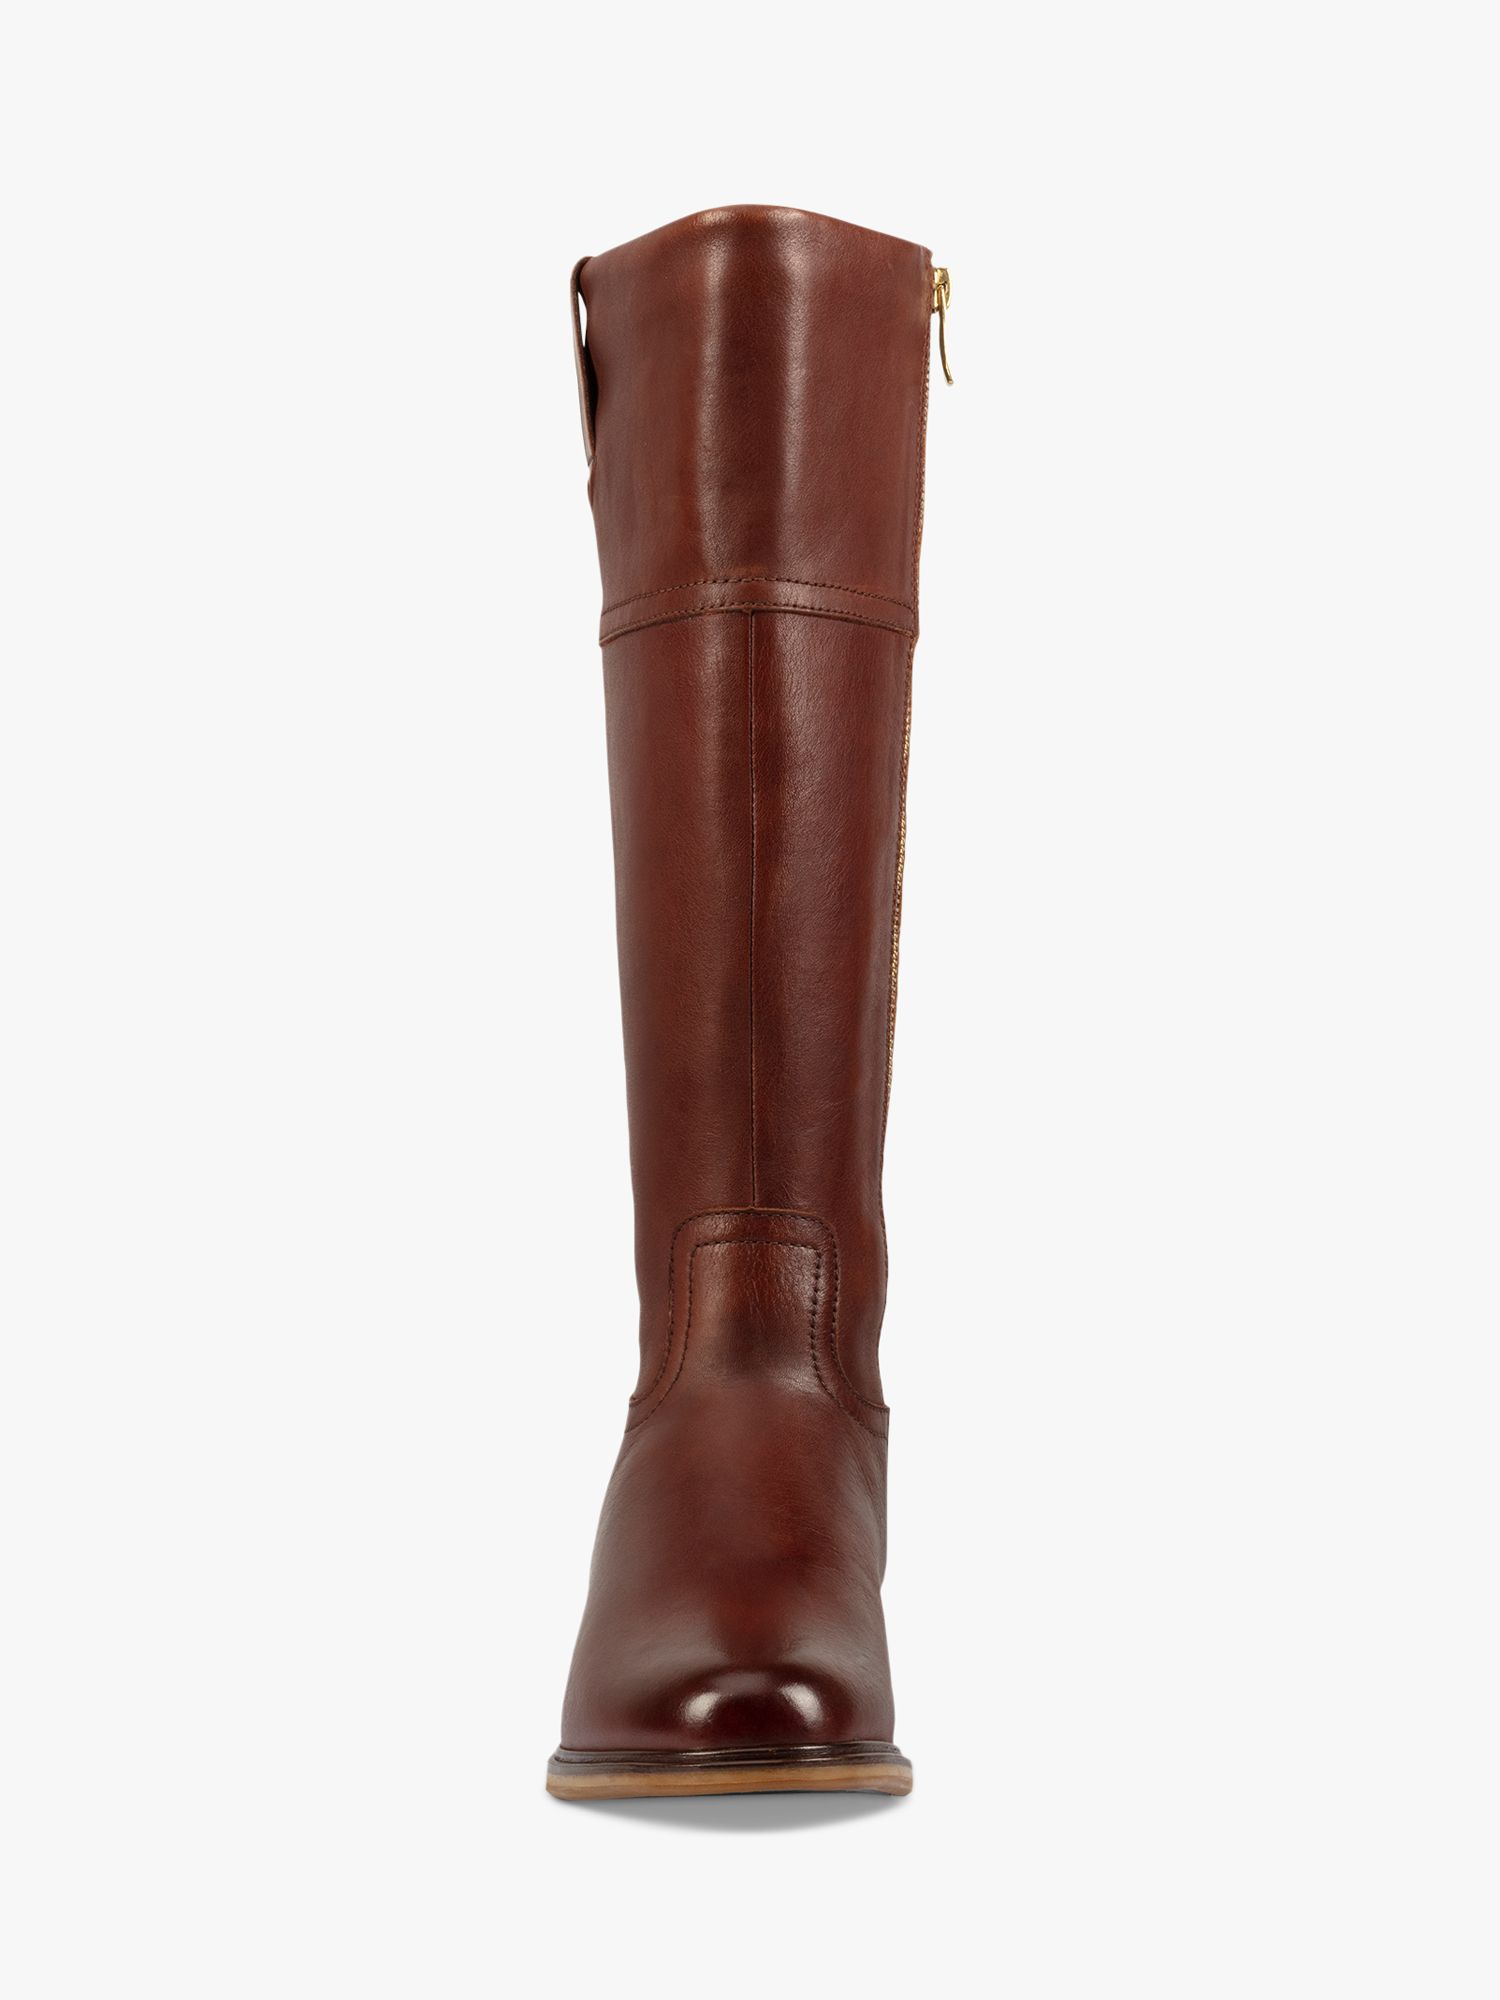 Clarkdale Hi Leather Knee High Boots, Tan at John Lewis Partners